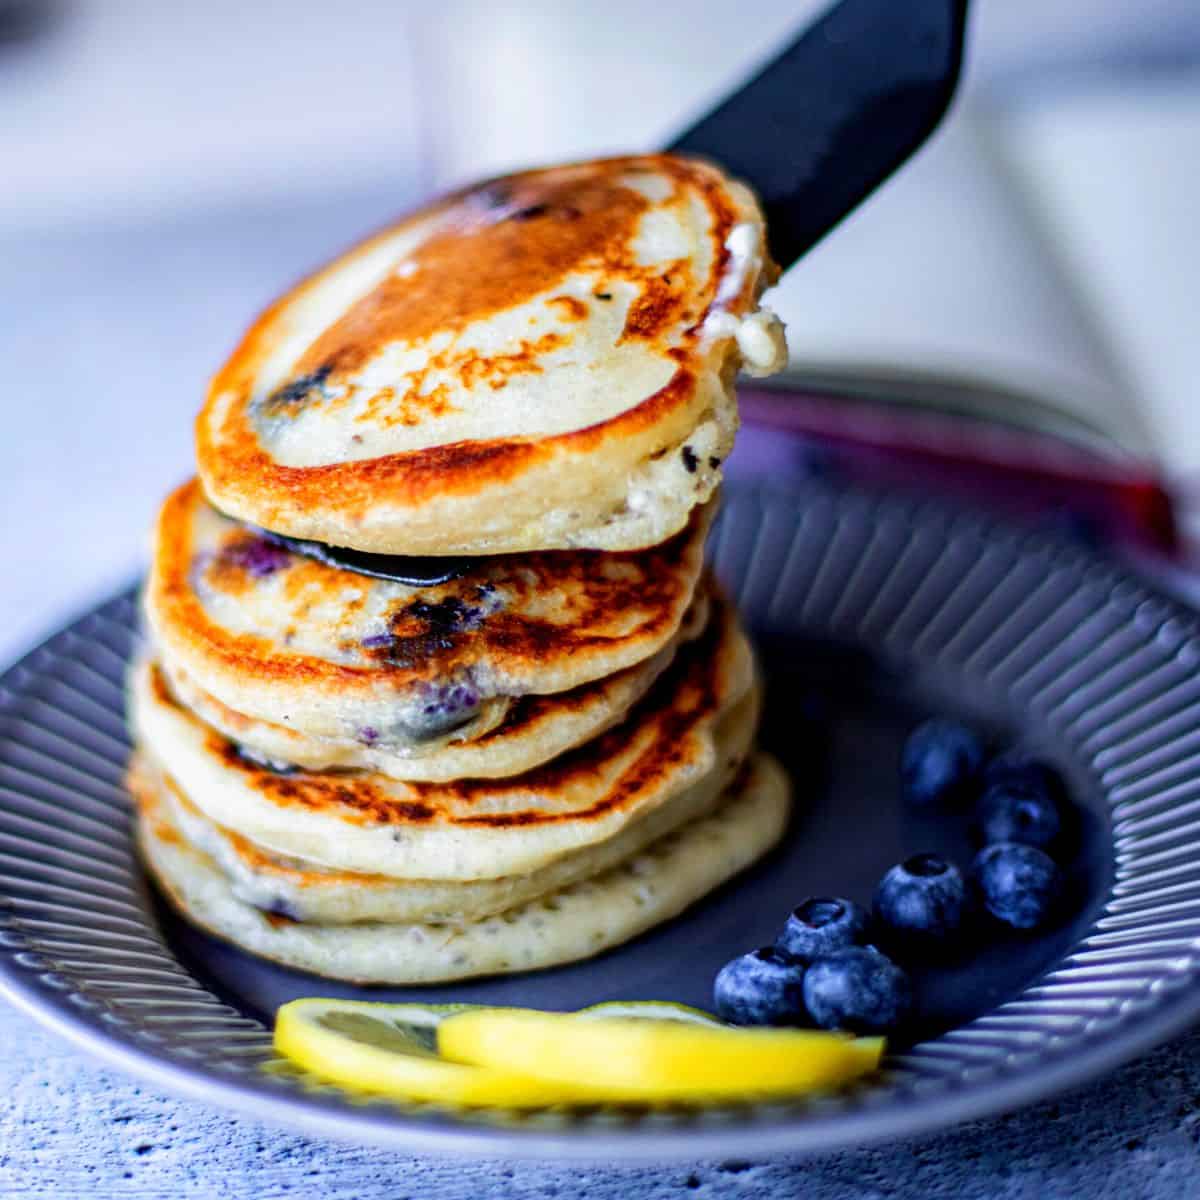 Easy Homemade Vegan Lemon, Blueberry and Chia Pancakes – delicious, quick and no added sugar